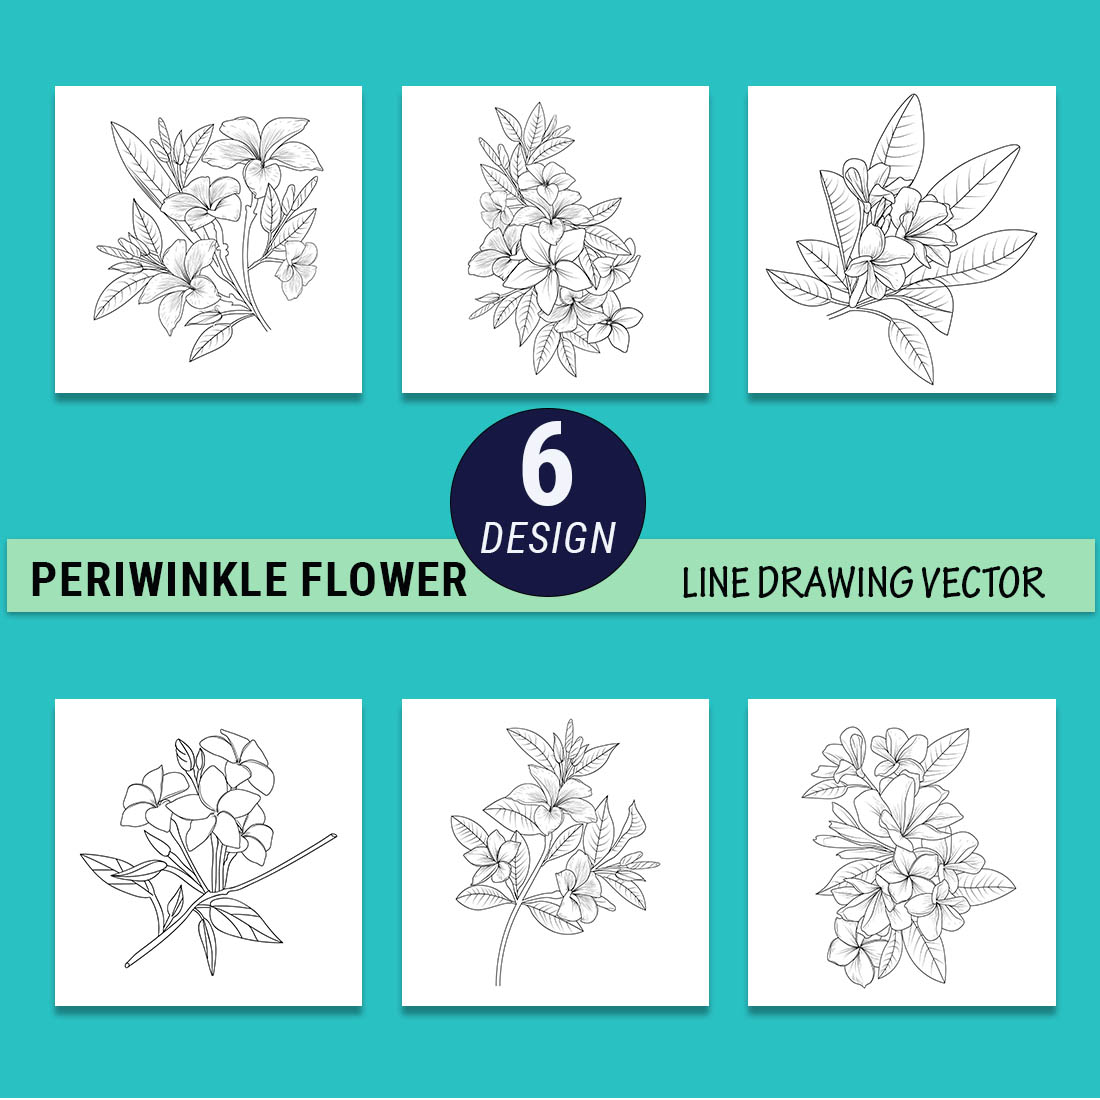 Frangipani flower drawing, vector sketch hand frangipani flower, sketch frangipani flower drawing, realistic frangipani flower drawing, realistic plumeria drawing preview image.